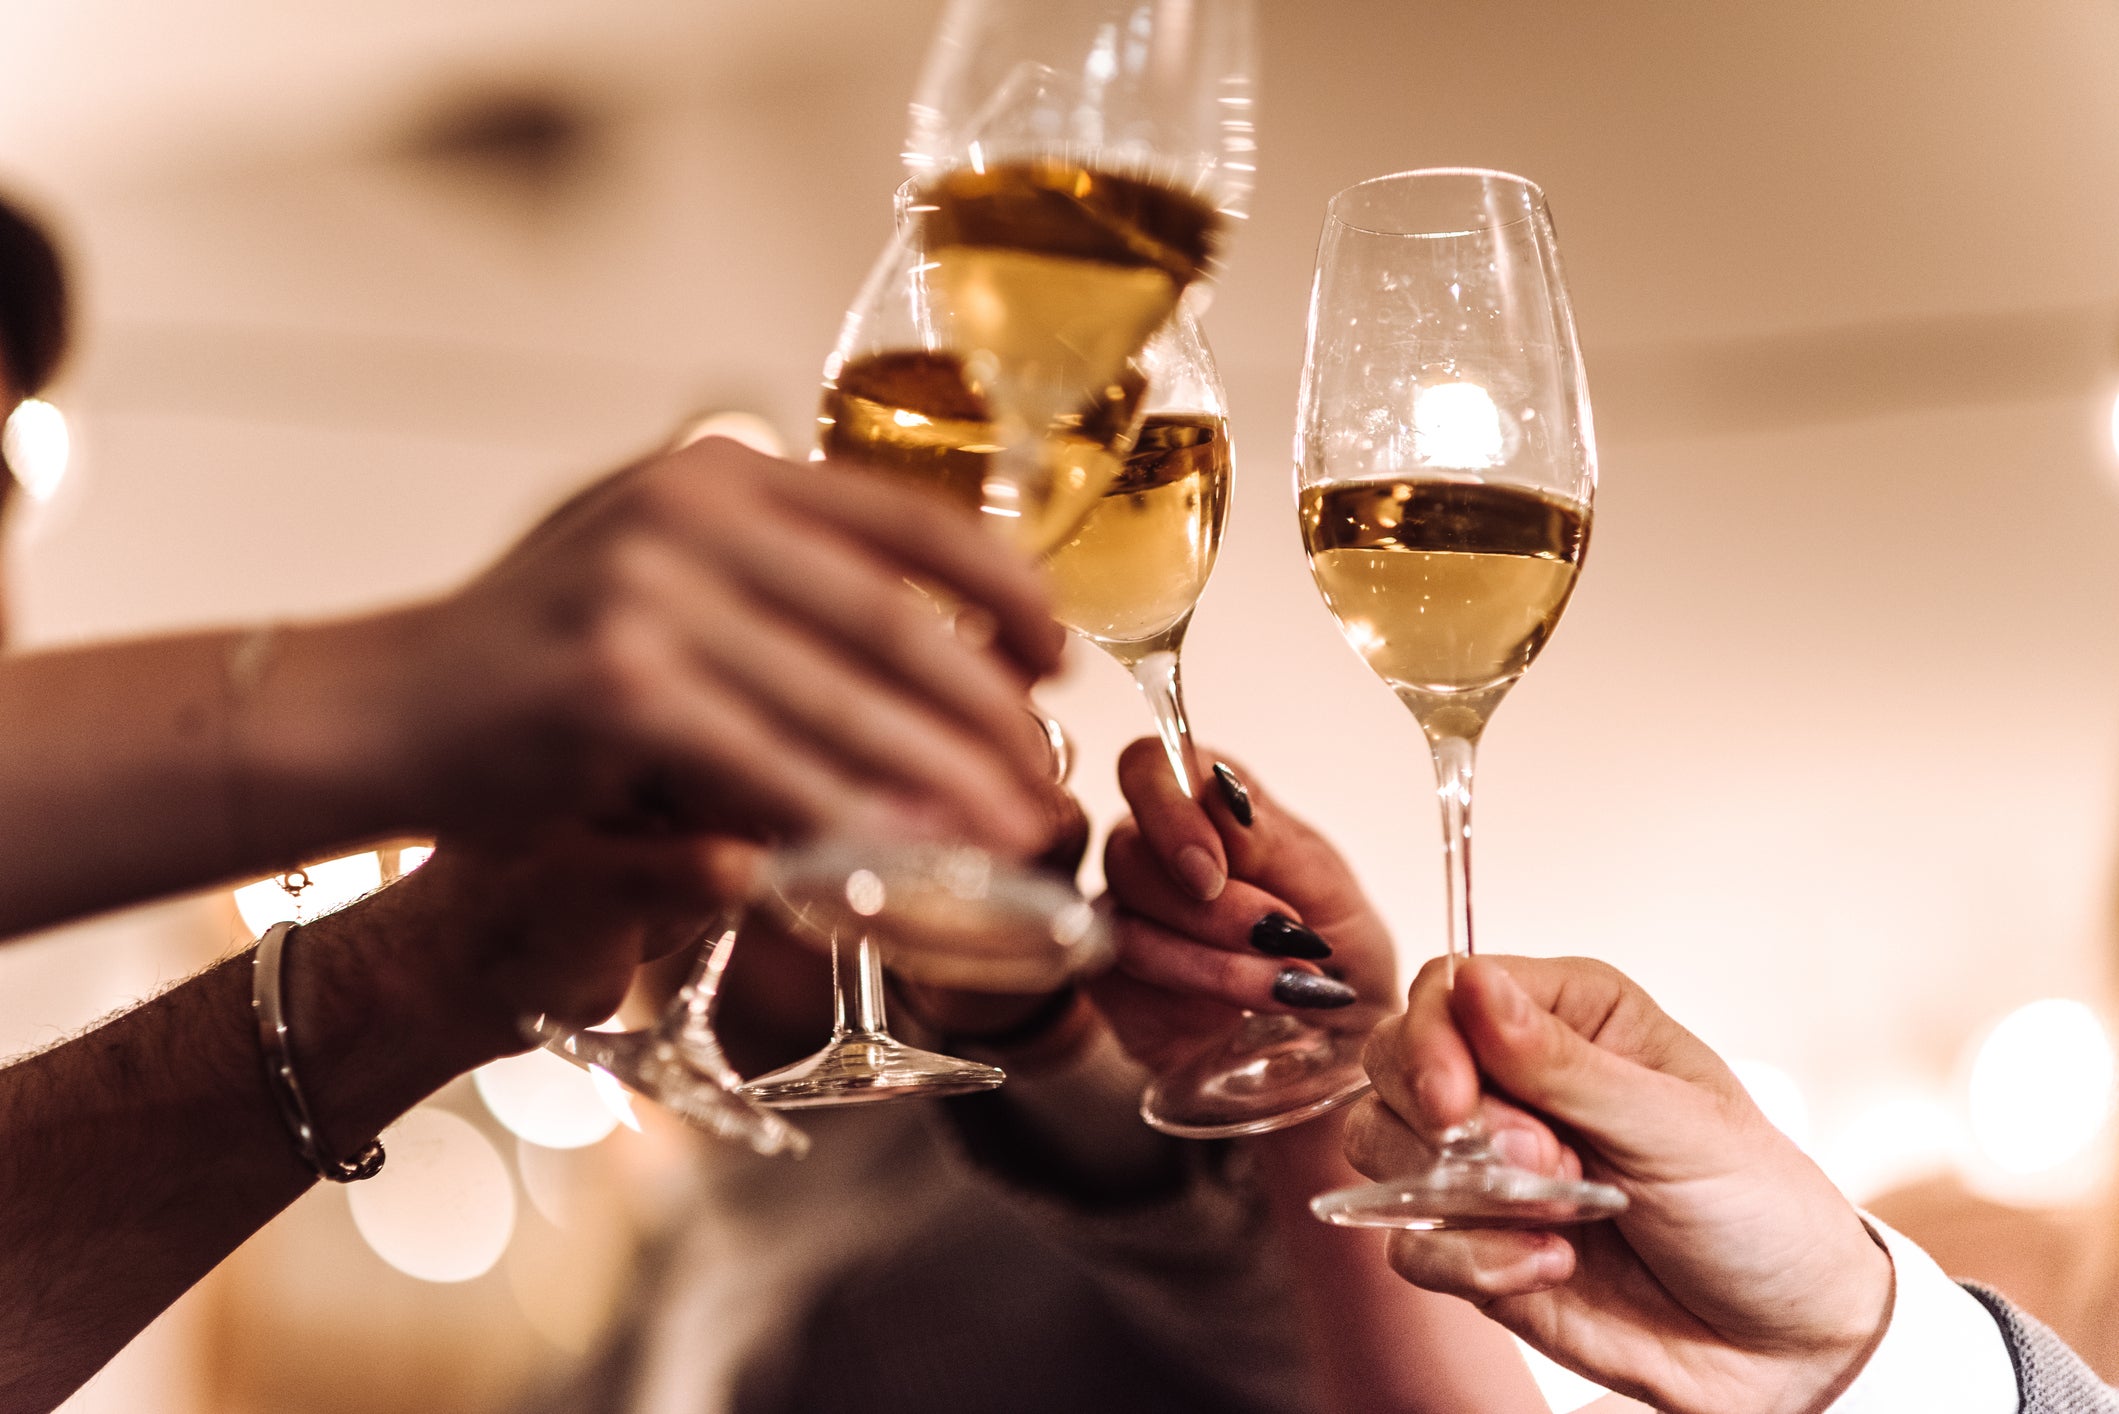 The US has now overtaken the UK in prosecco exports